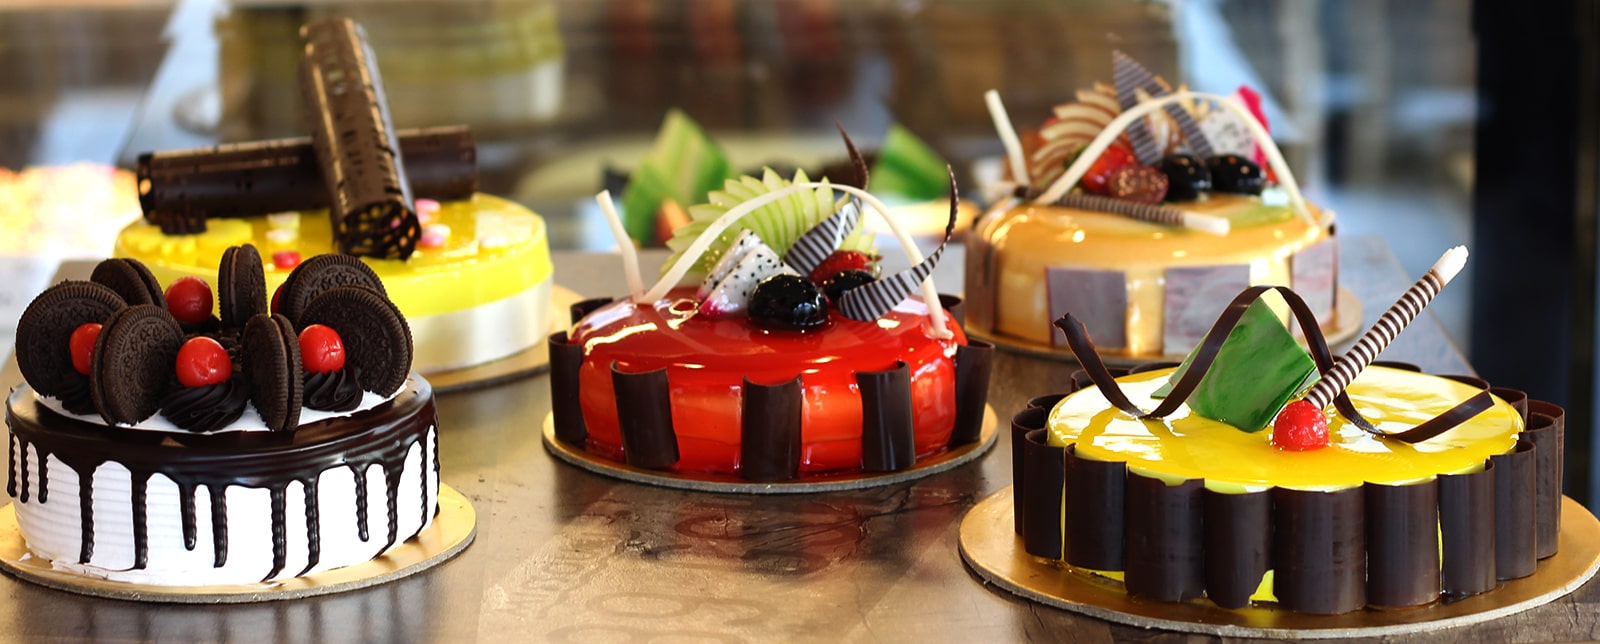 Online Cake Delivery in Gurgaon - 50% Off - Now Rs 349 | IndiaCakes